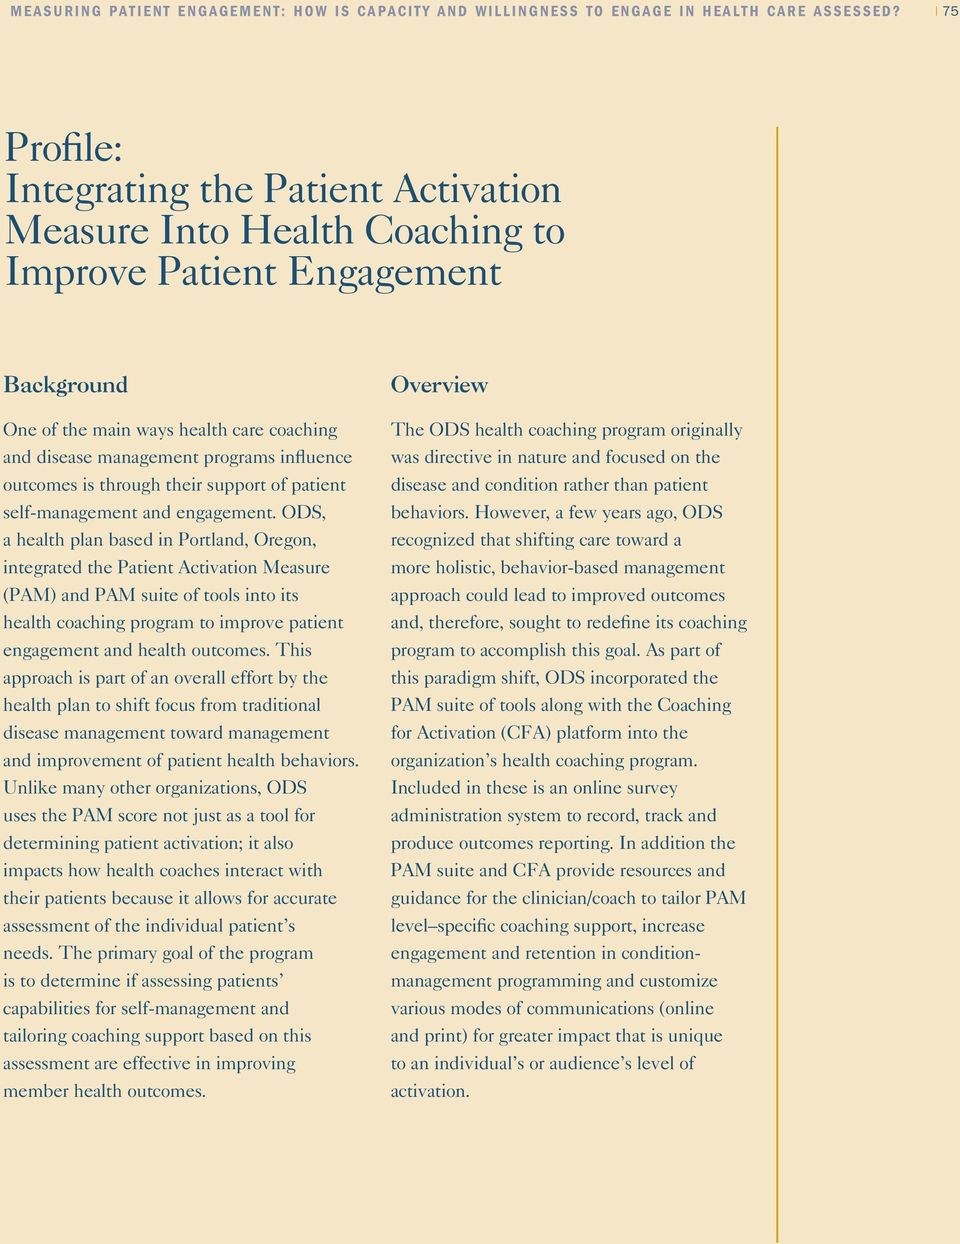 influence outcomes is through their support of patient self-management and engagement.